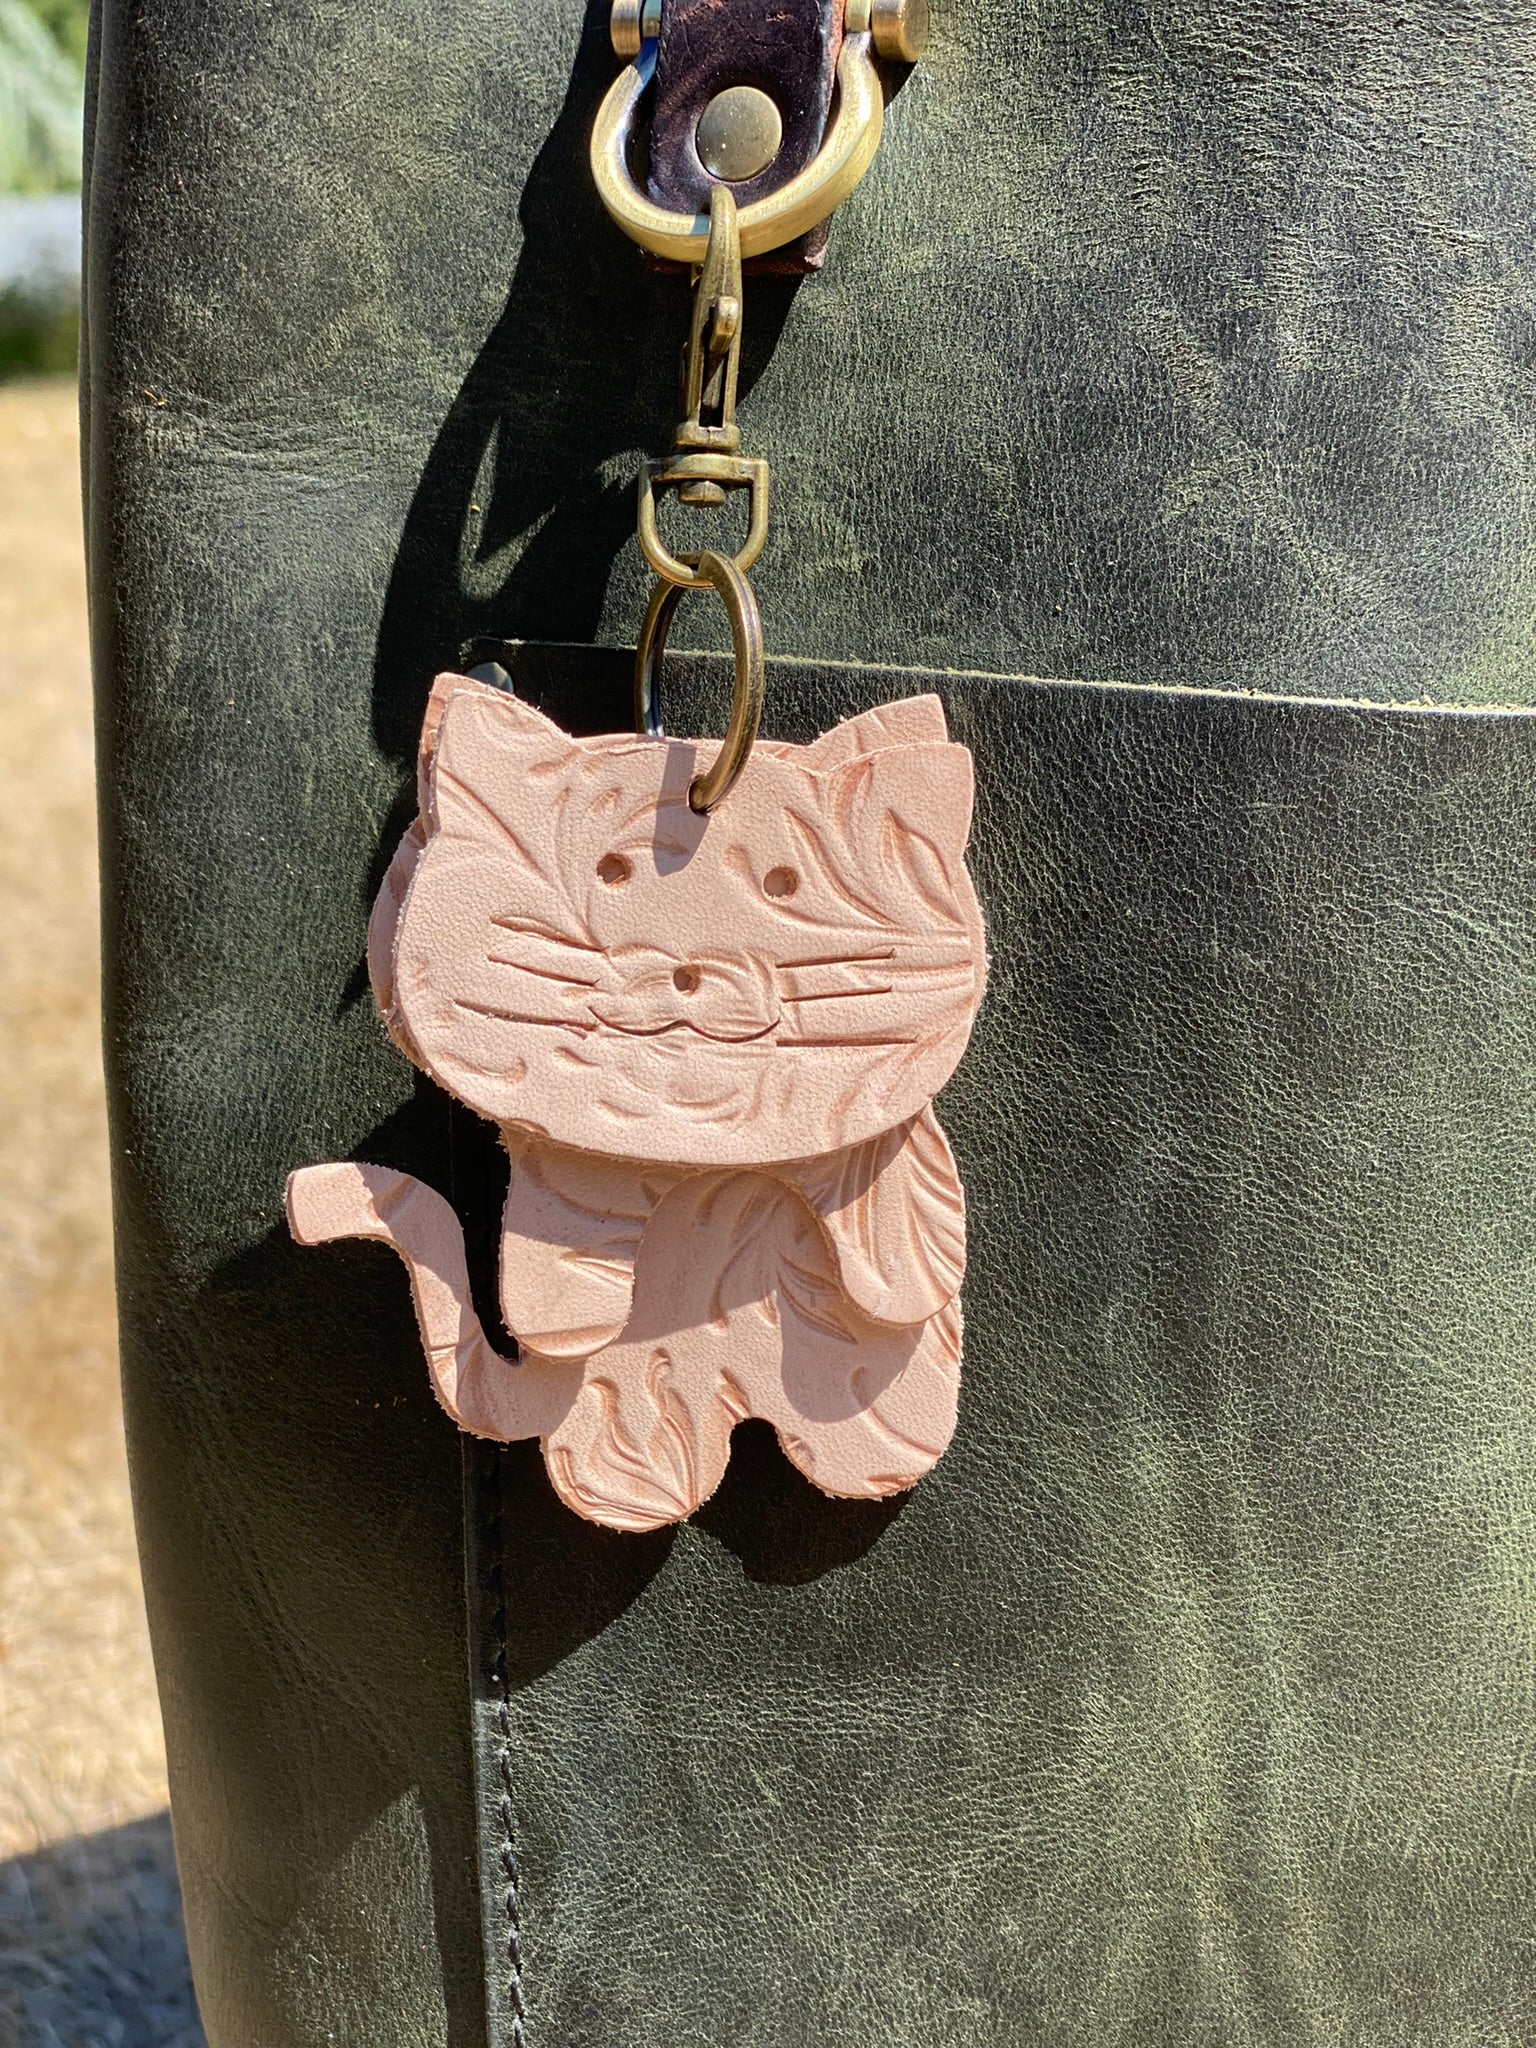 Embossed Veg Tan Leather Cat Keyring Purse Charm, Bag Clip on Cat Fob, Cute Cat Lovers Accessory